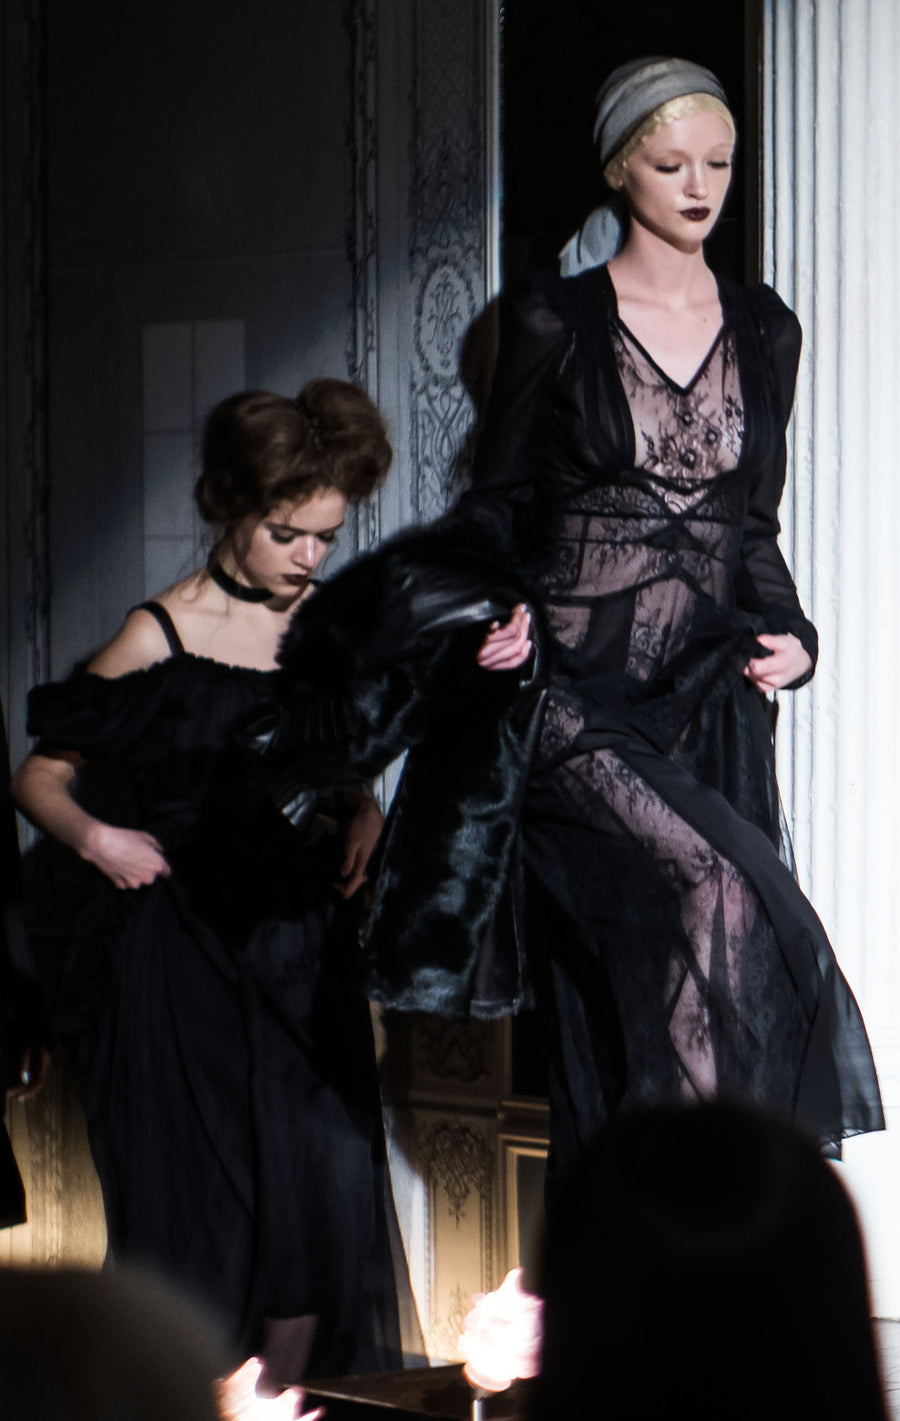 Black French Solstiss Lace Lover Dress Jung Wendy Nichol Clothing Fashion Designer Handmade in NYC New York City AW14 Ready to Wear Fashion Runway Show Custom Tailoring Made to Measure Made to Order Long Sleeve Sheer cut out panels lace dress Morticia Vampire Dracula Goth Gothic Vintage inspired Victorian Edwardian Fall Wedding Winter Bride